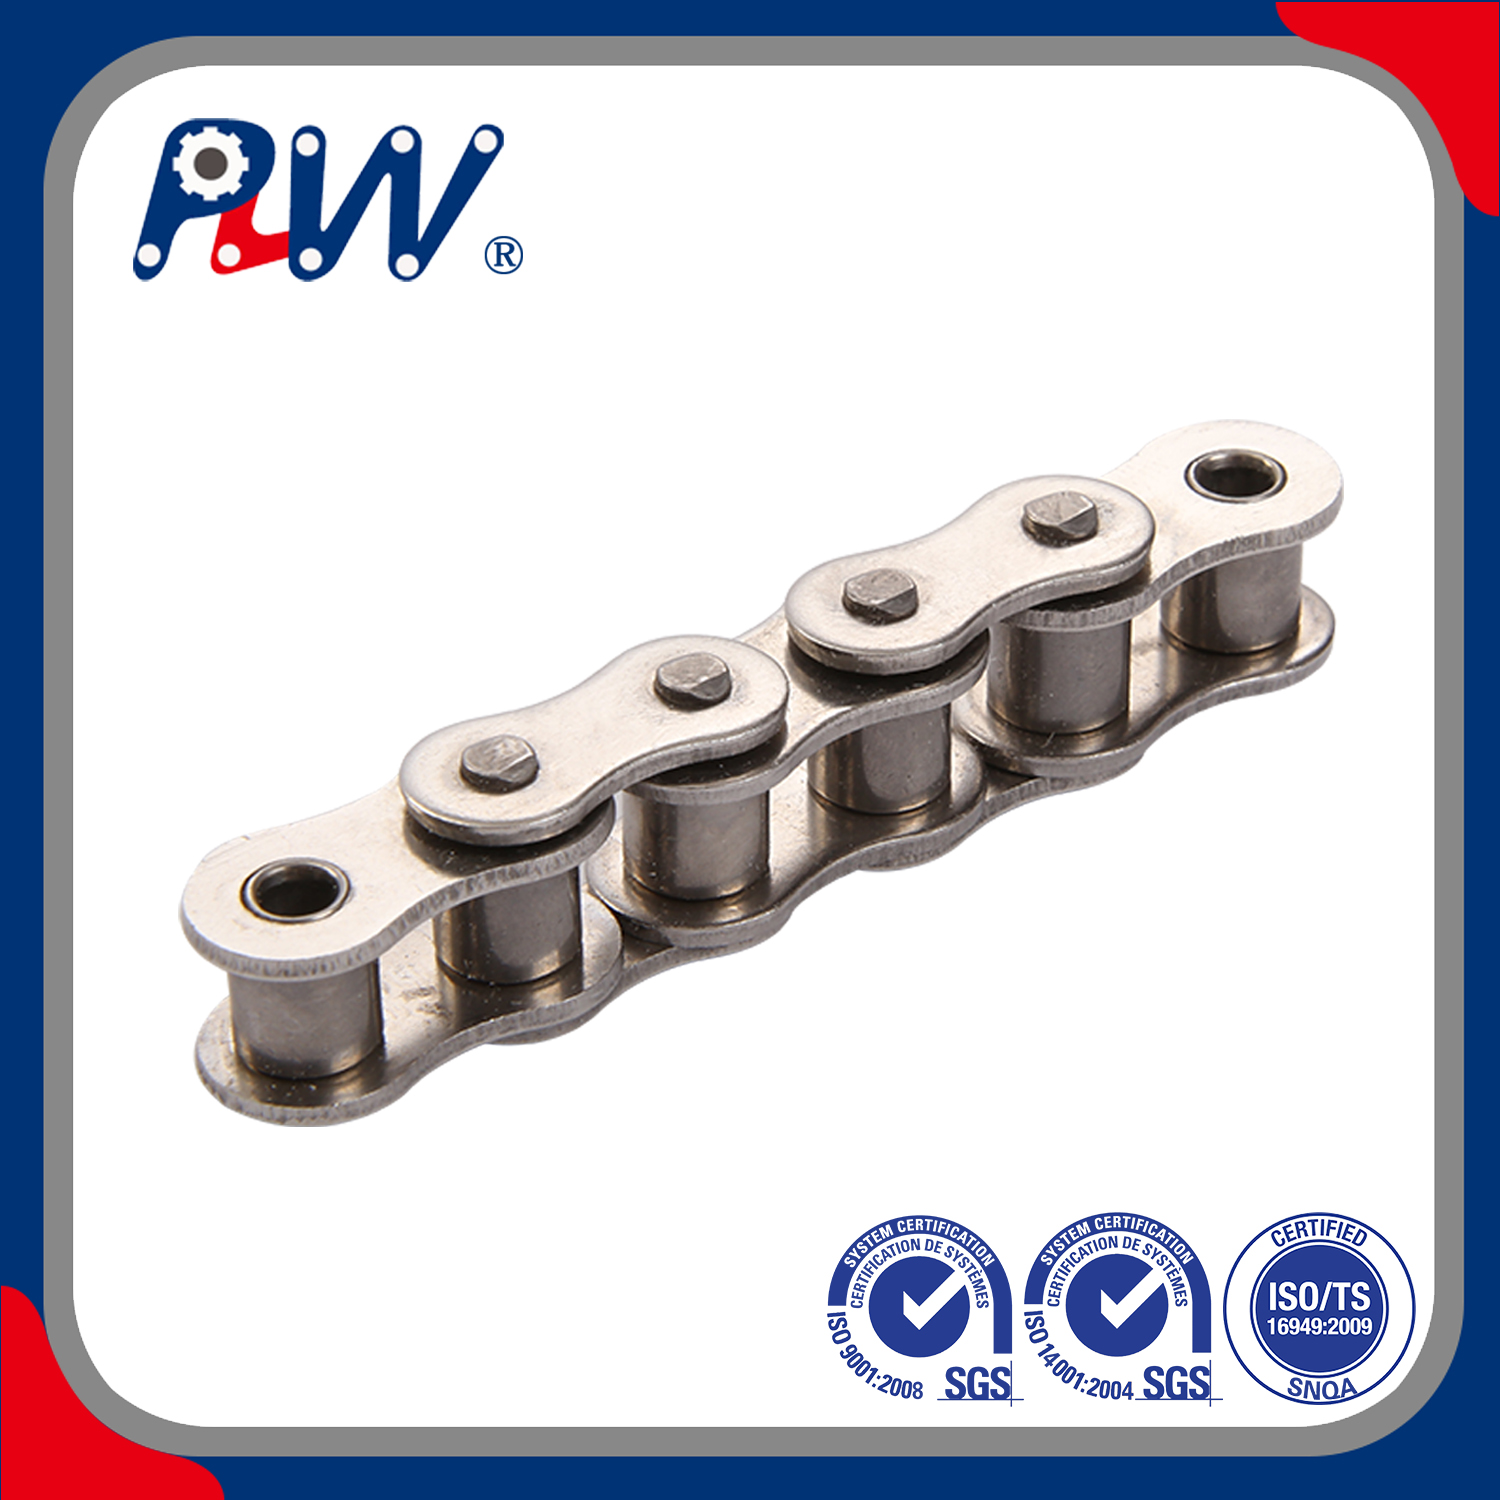 ISO/ANSI/DIN Standard Short Pitch Precision Stainless Steel Hardware Transmission Motorcycle Industrial Roller Chain